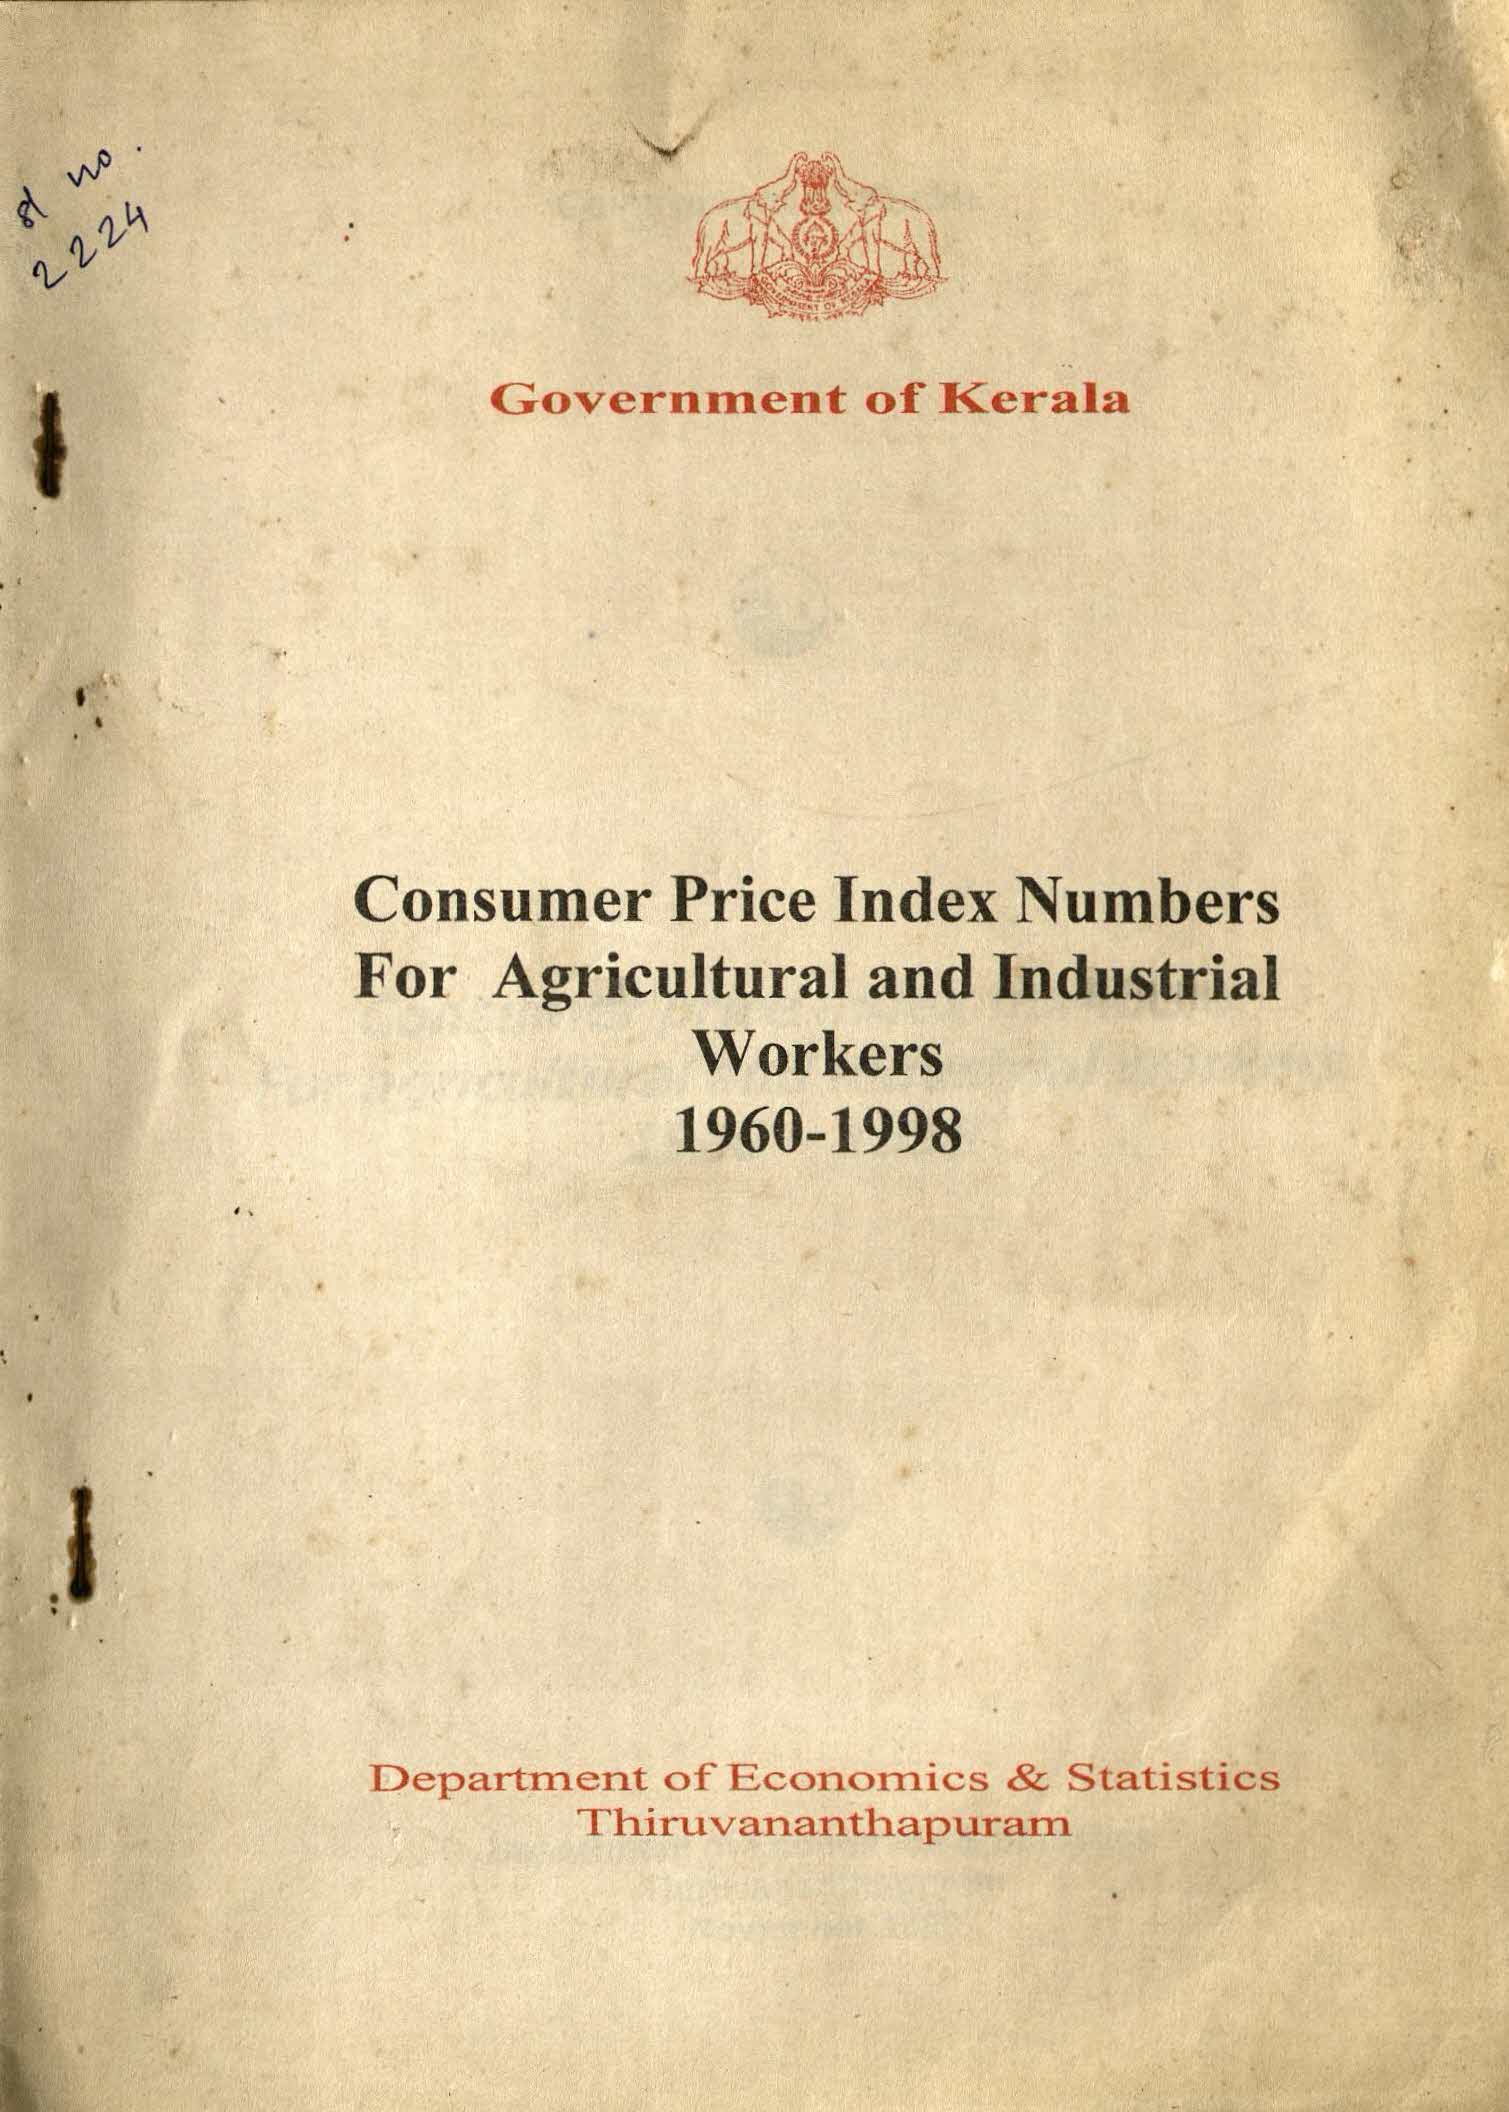 Consumer Price Index Numbers For Agricultural And Industrial Workers 1960-1998